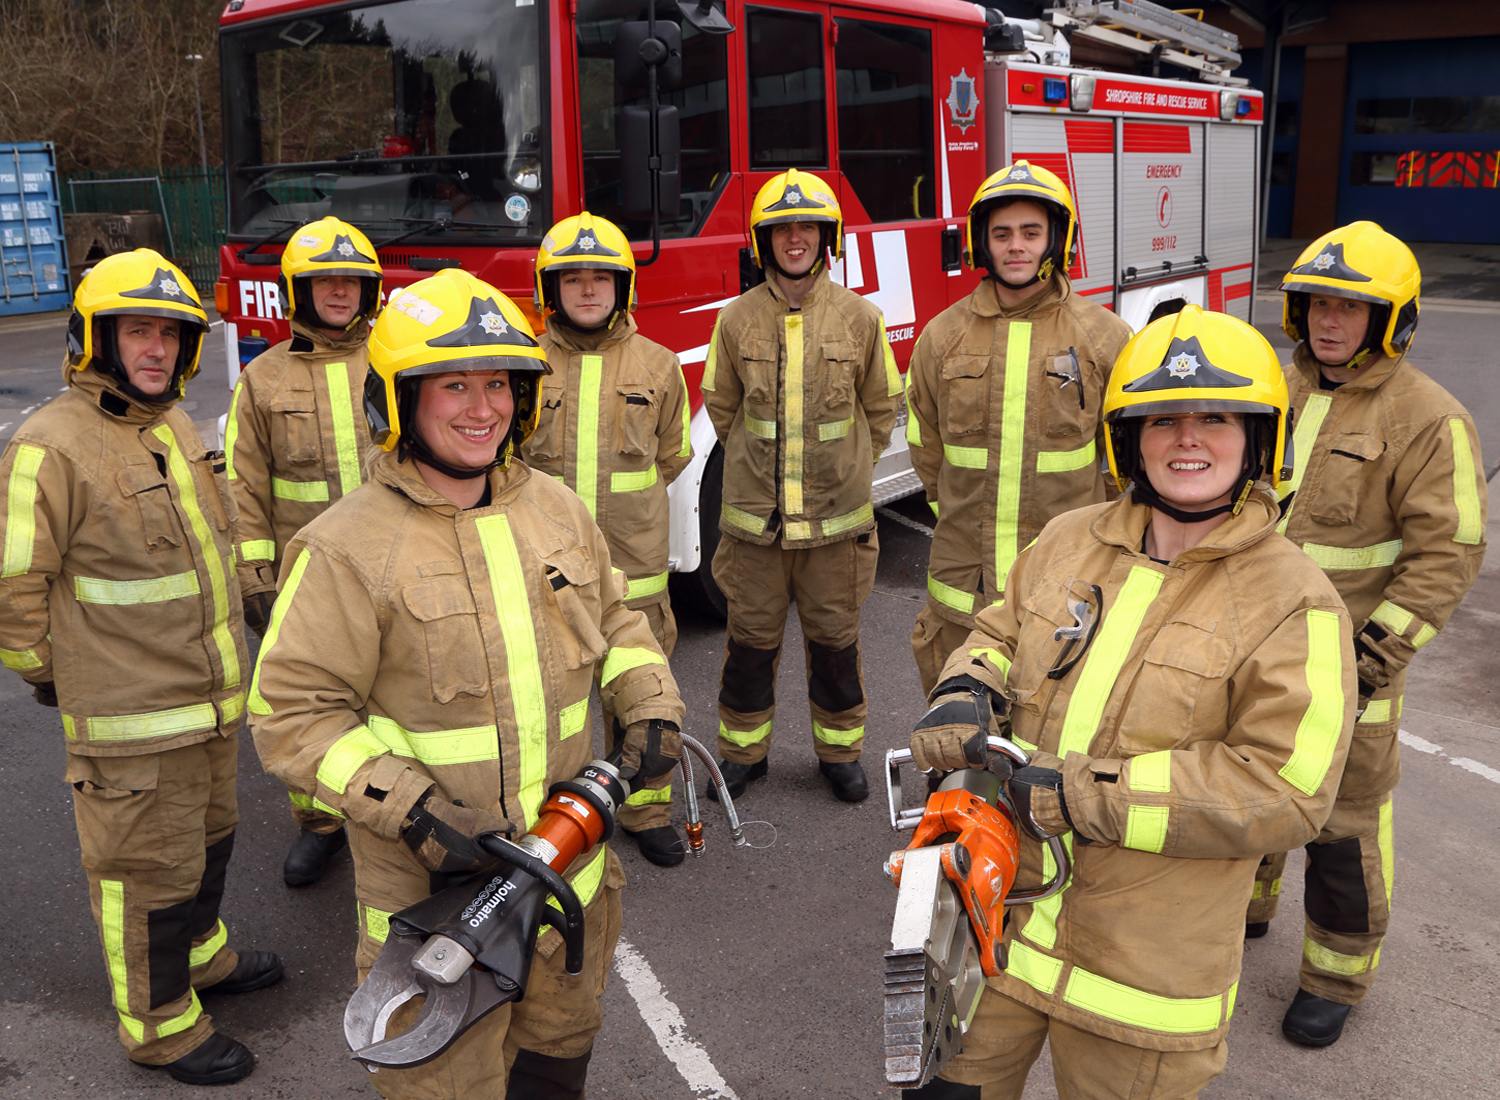 Kat Frost and Michelle Townsend with their fellow new recruits in training with Holmatro cutting gear to rescue car crash victims